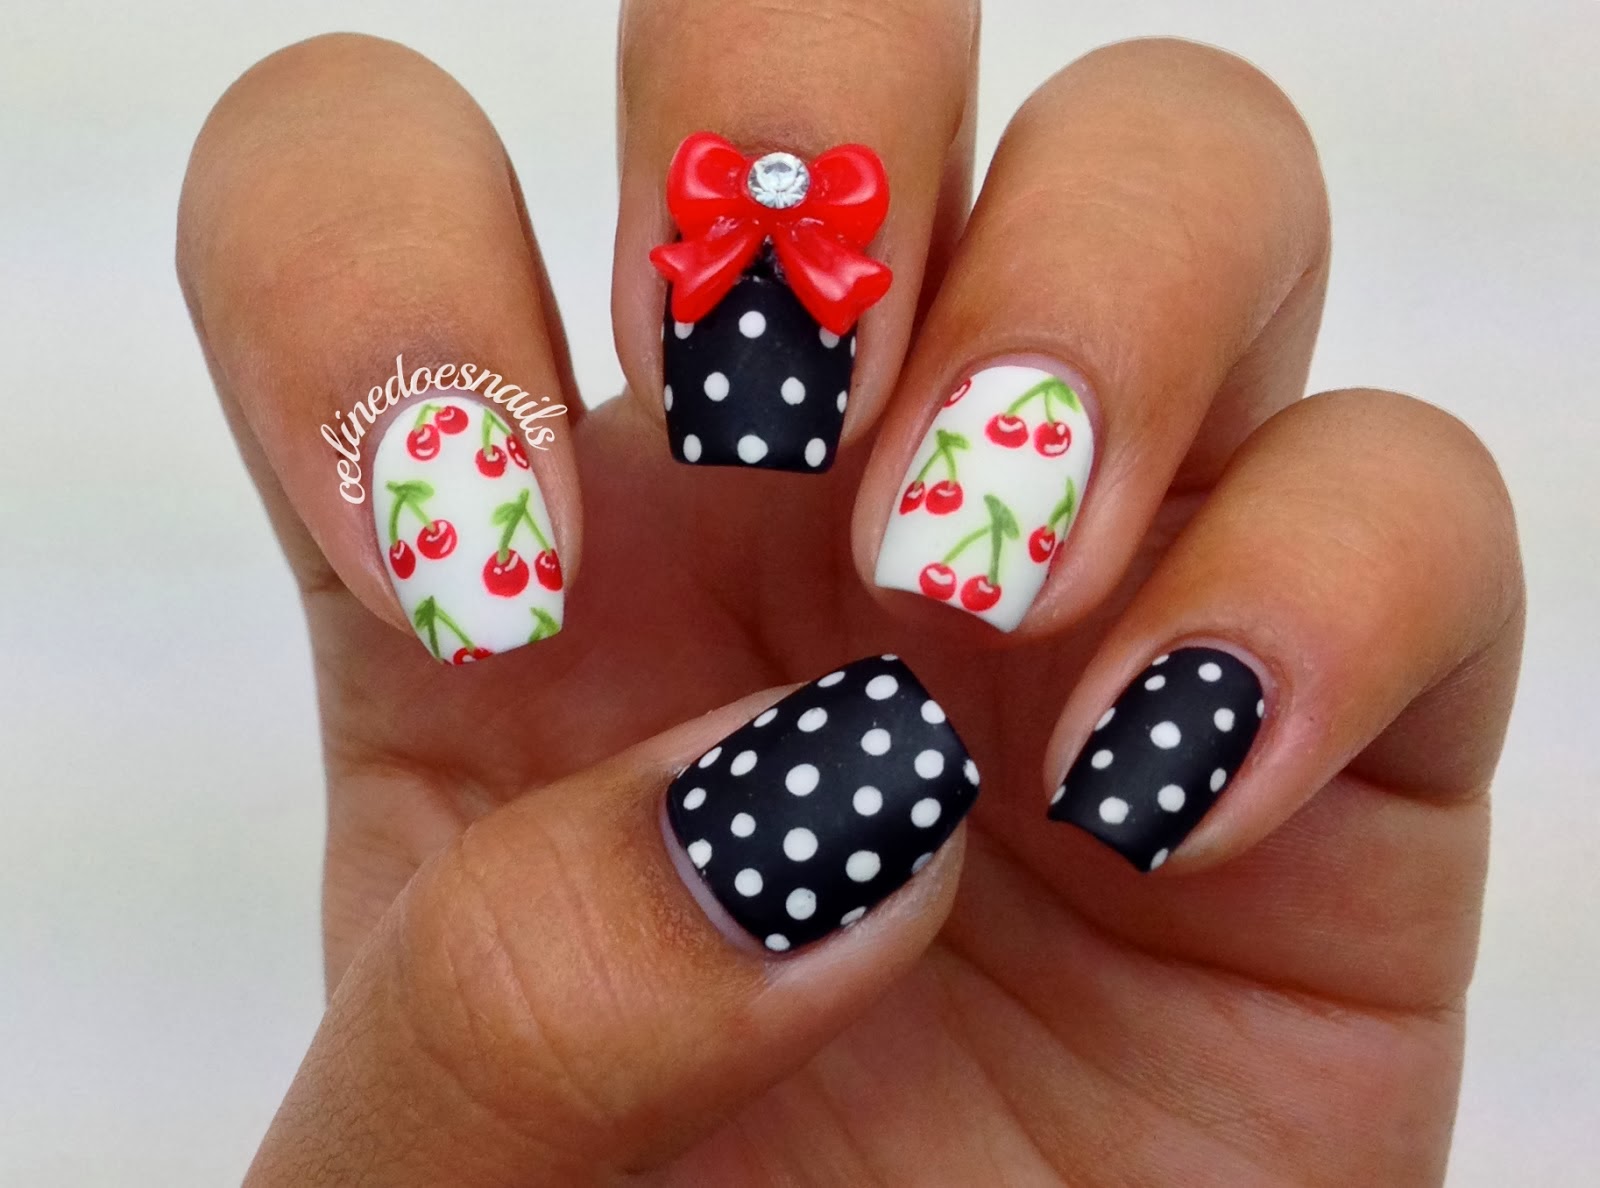 10. November Nail Designs with Sweater Patterns - wide 5